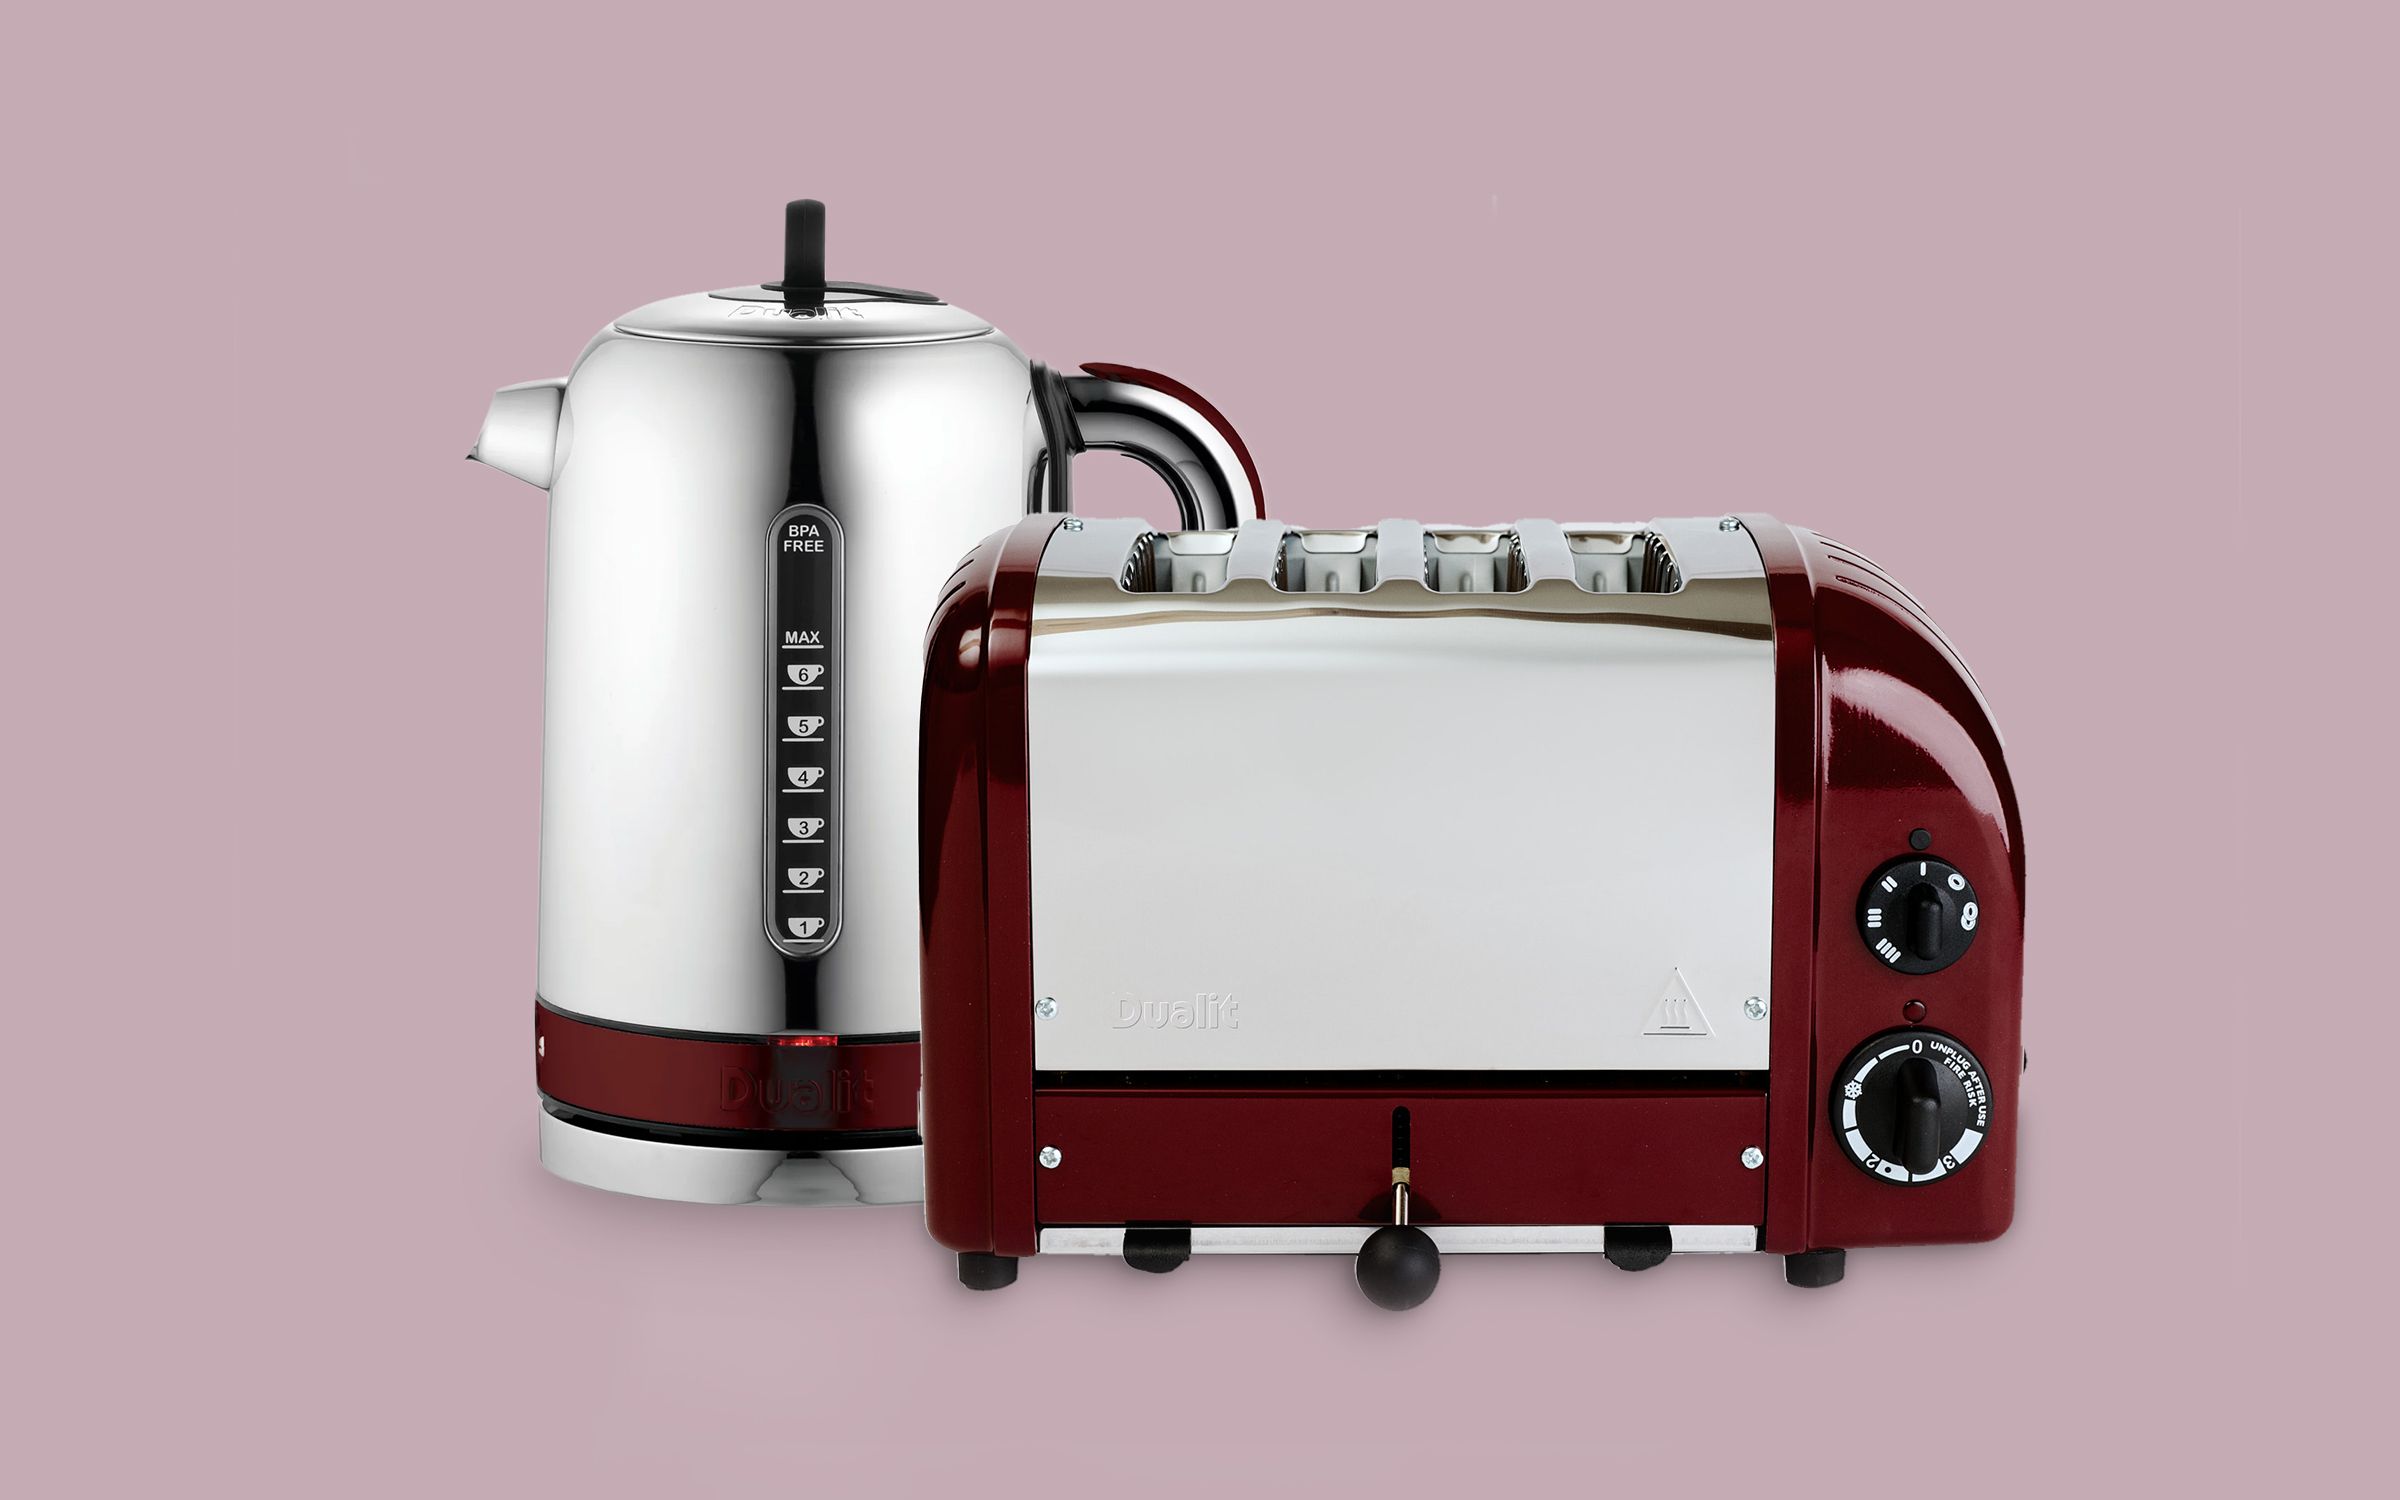 On trial: Dualit Classic Kettle and Toaster in Damson